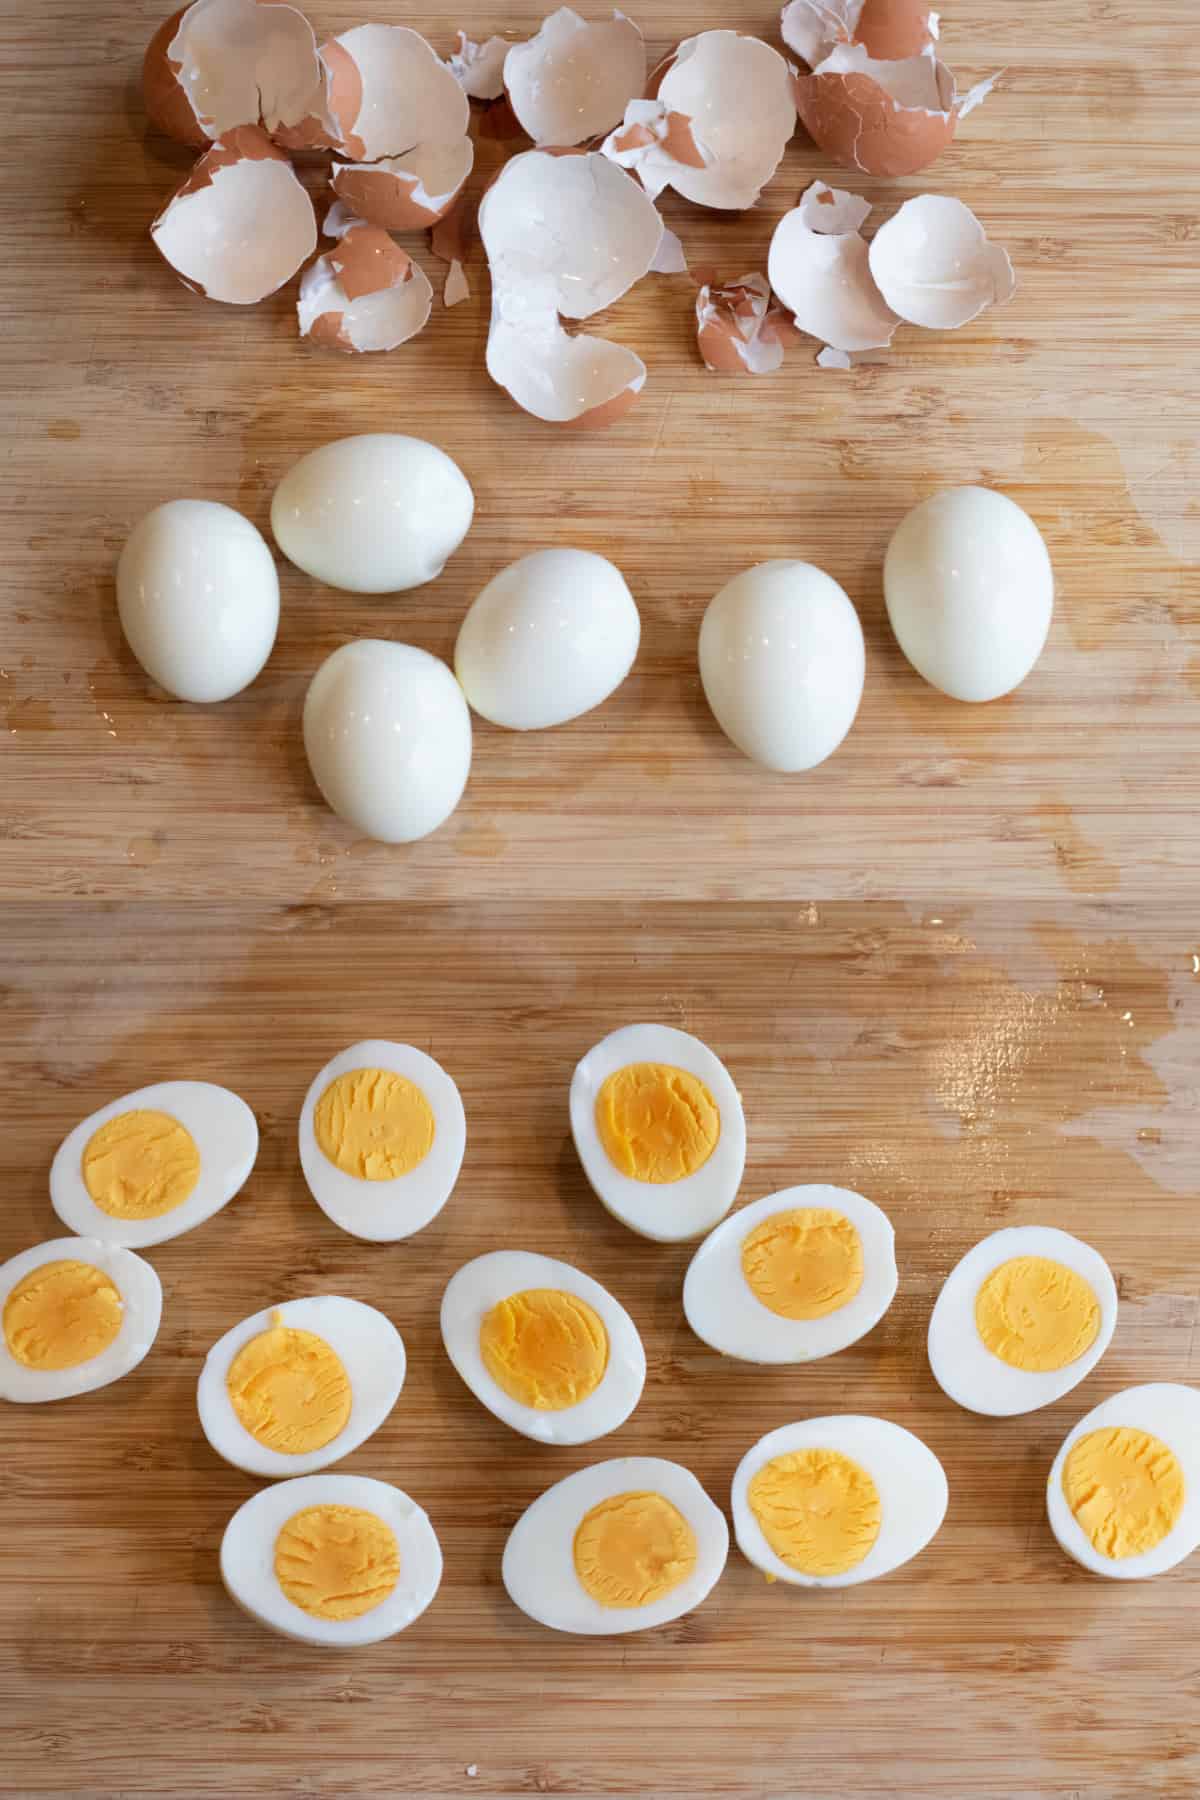 a cutting board of peeled hard boiled eggs and then the eggs cut in half.